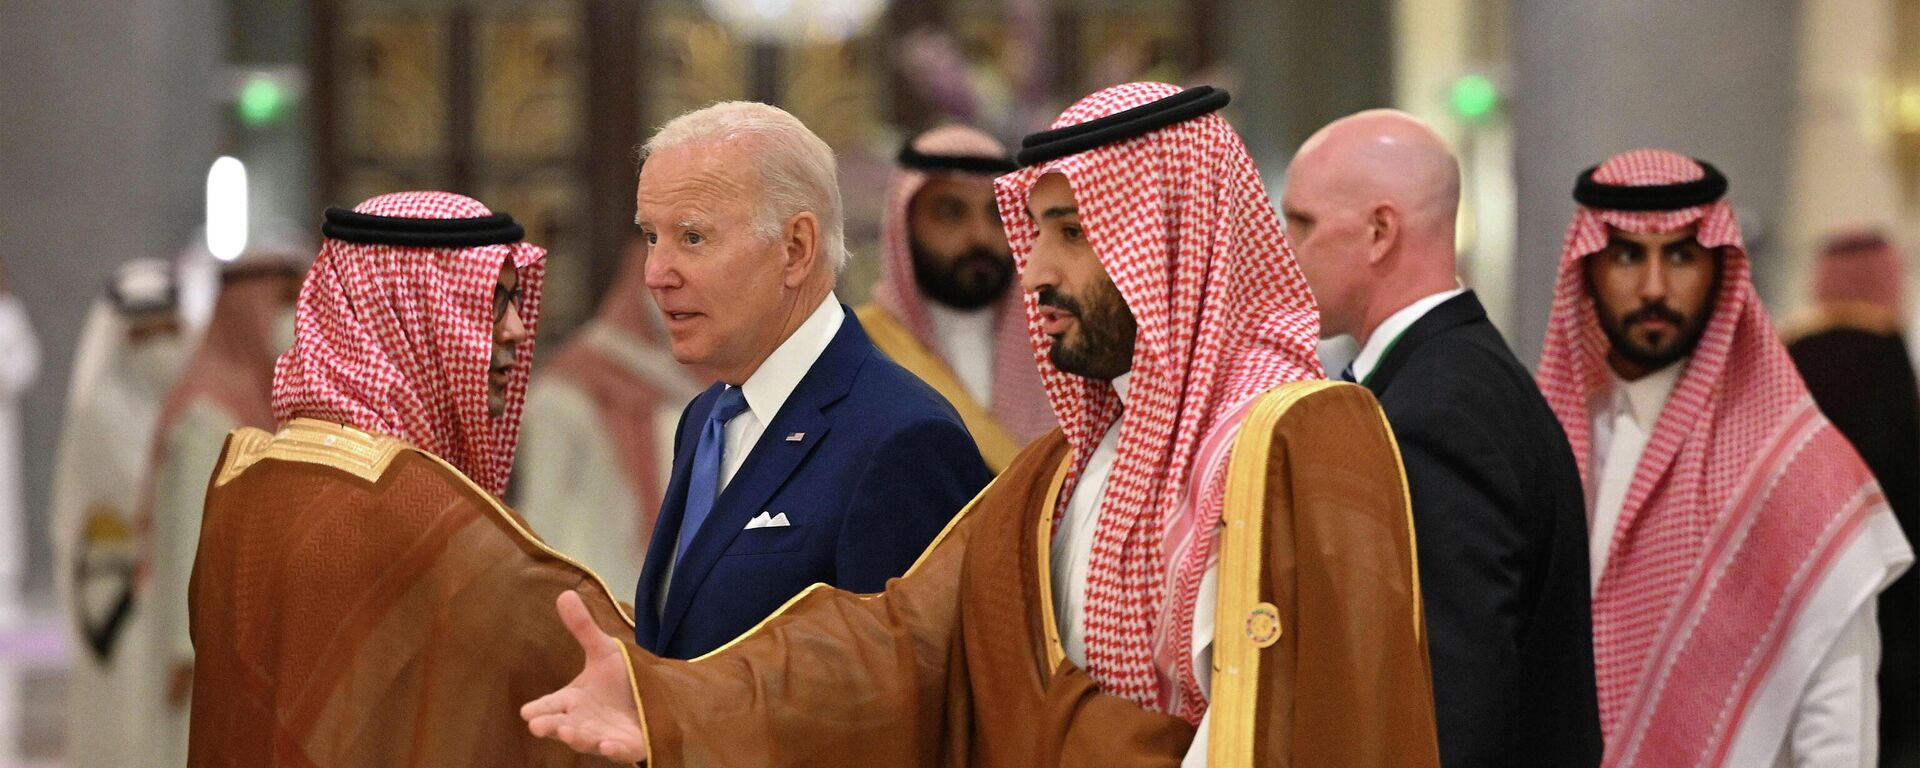 U.S. President Joe Biden, center left, and Saudi Crown Prince Mohammed bin Salman, center, arrive for the family photo during the GCC+3 (Gulf Cooperation Council) meeting at a hotel in Saudi Arabia's Red Sea coastal city of Jeddah Saturday, July 16, 2022 - Sputnik International, 1920, 14.10.2022